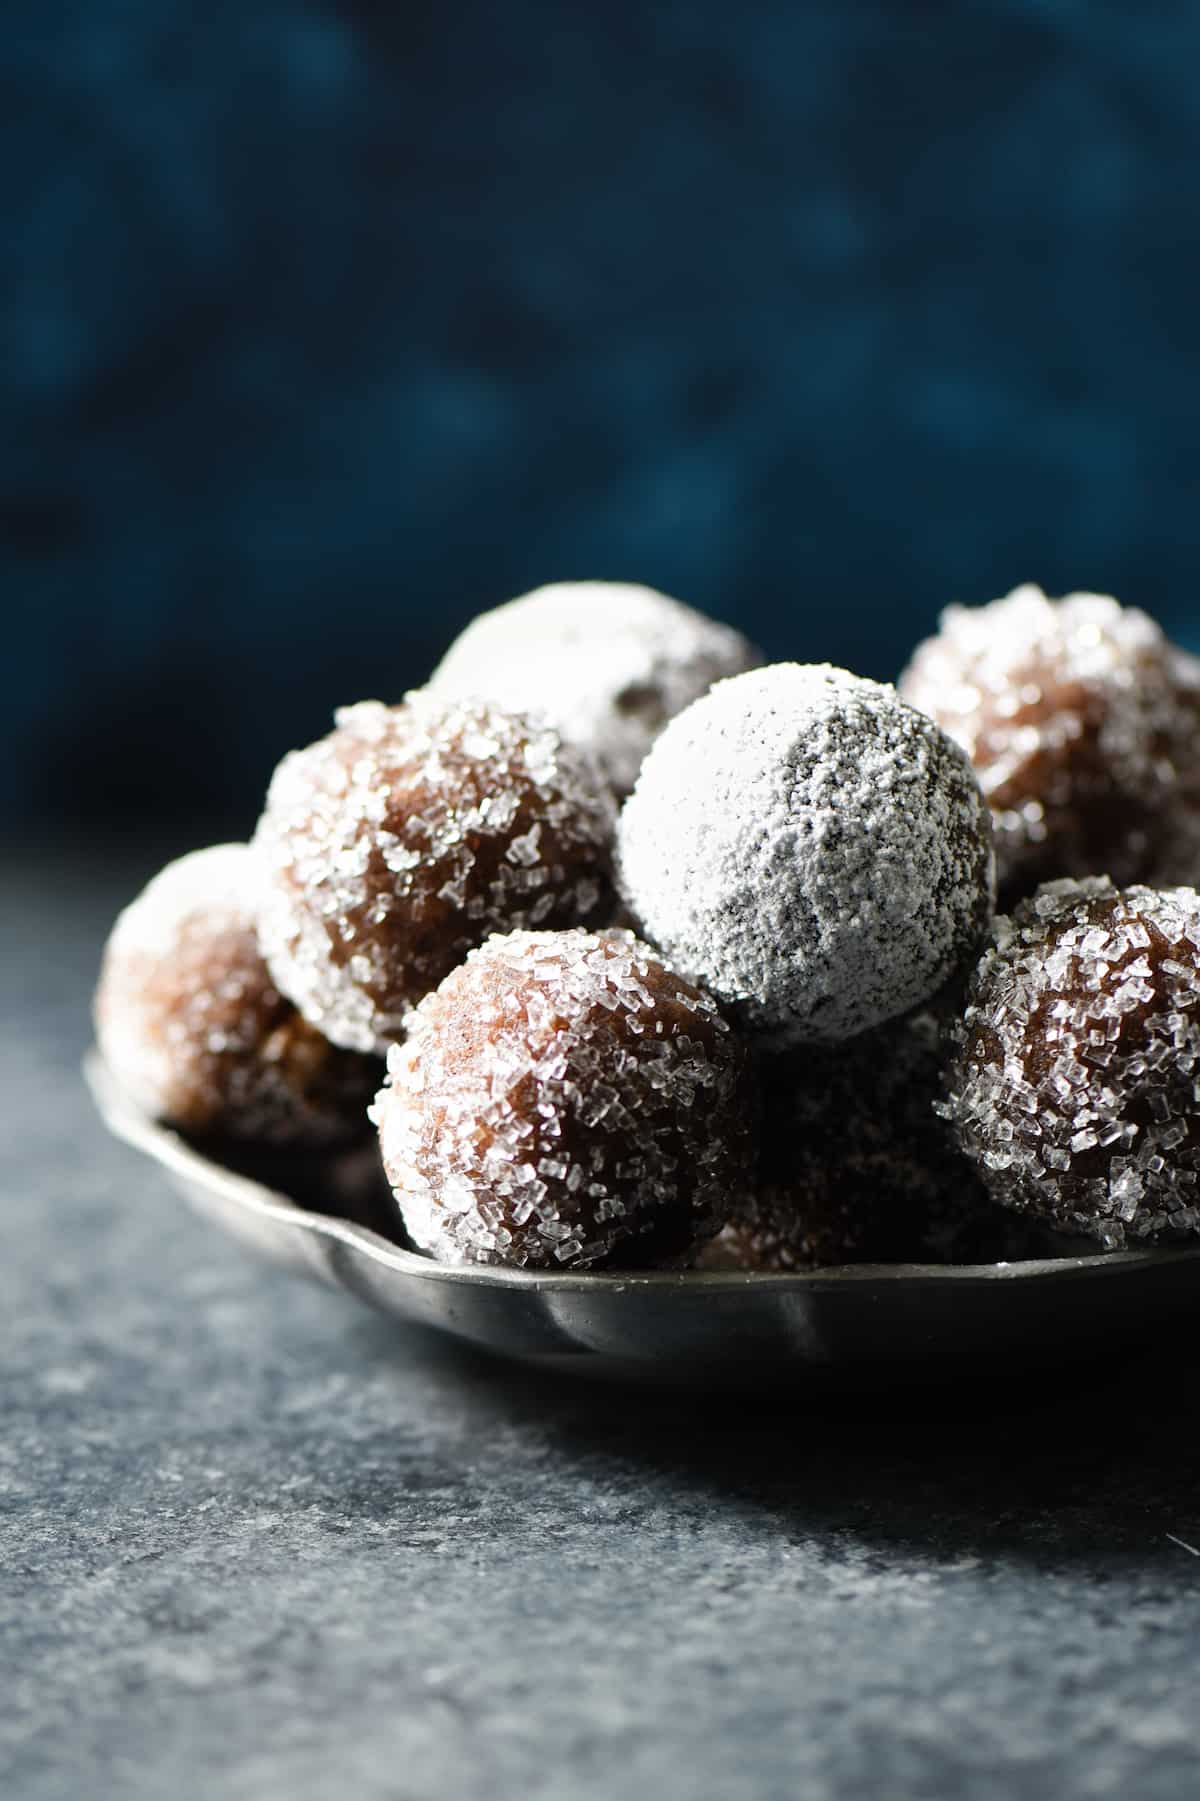 These Almond Flour Rum Balls are a sophisticated alternative to frosting-laden holiday treats, and perfect with a cup of coffee or tea. Naturally gluten free. | foxeslovelemons.com